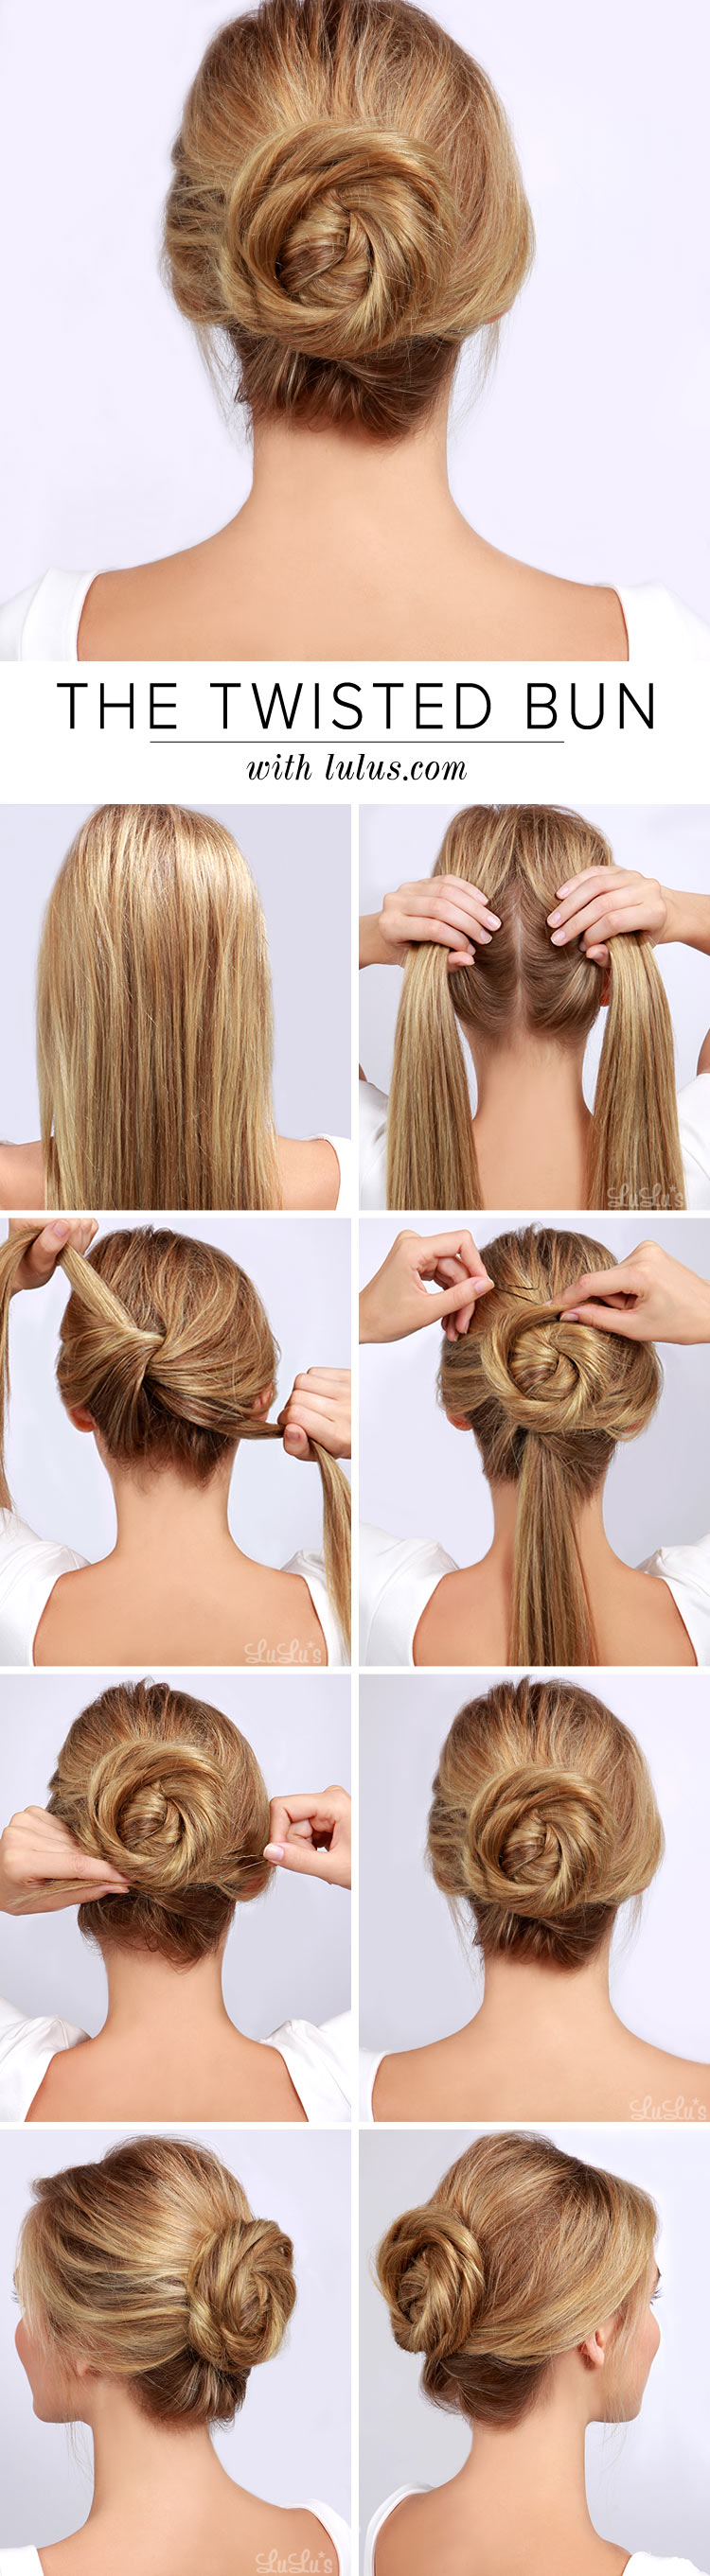 Christmas party hairstyles - Mudpak Hair + Beauty